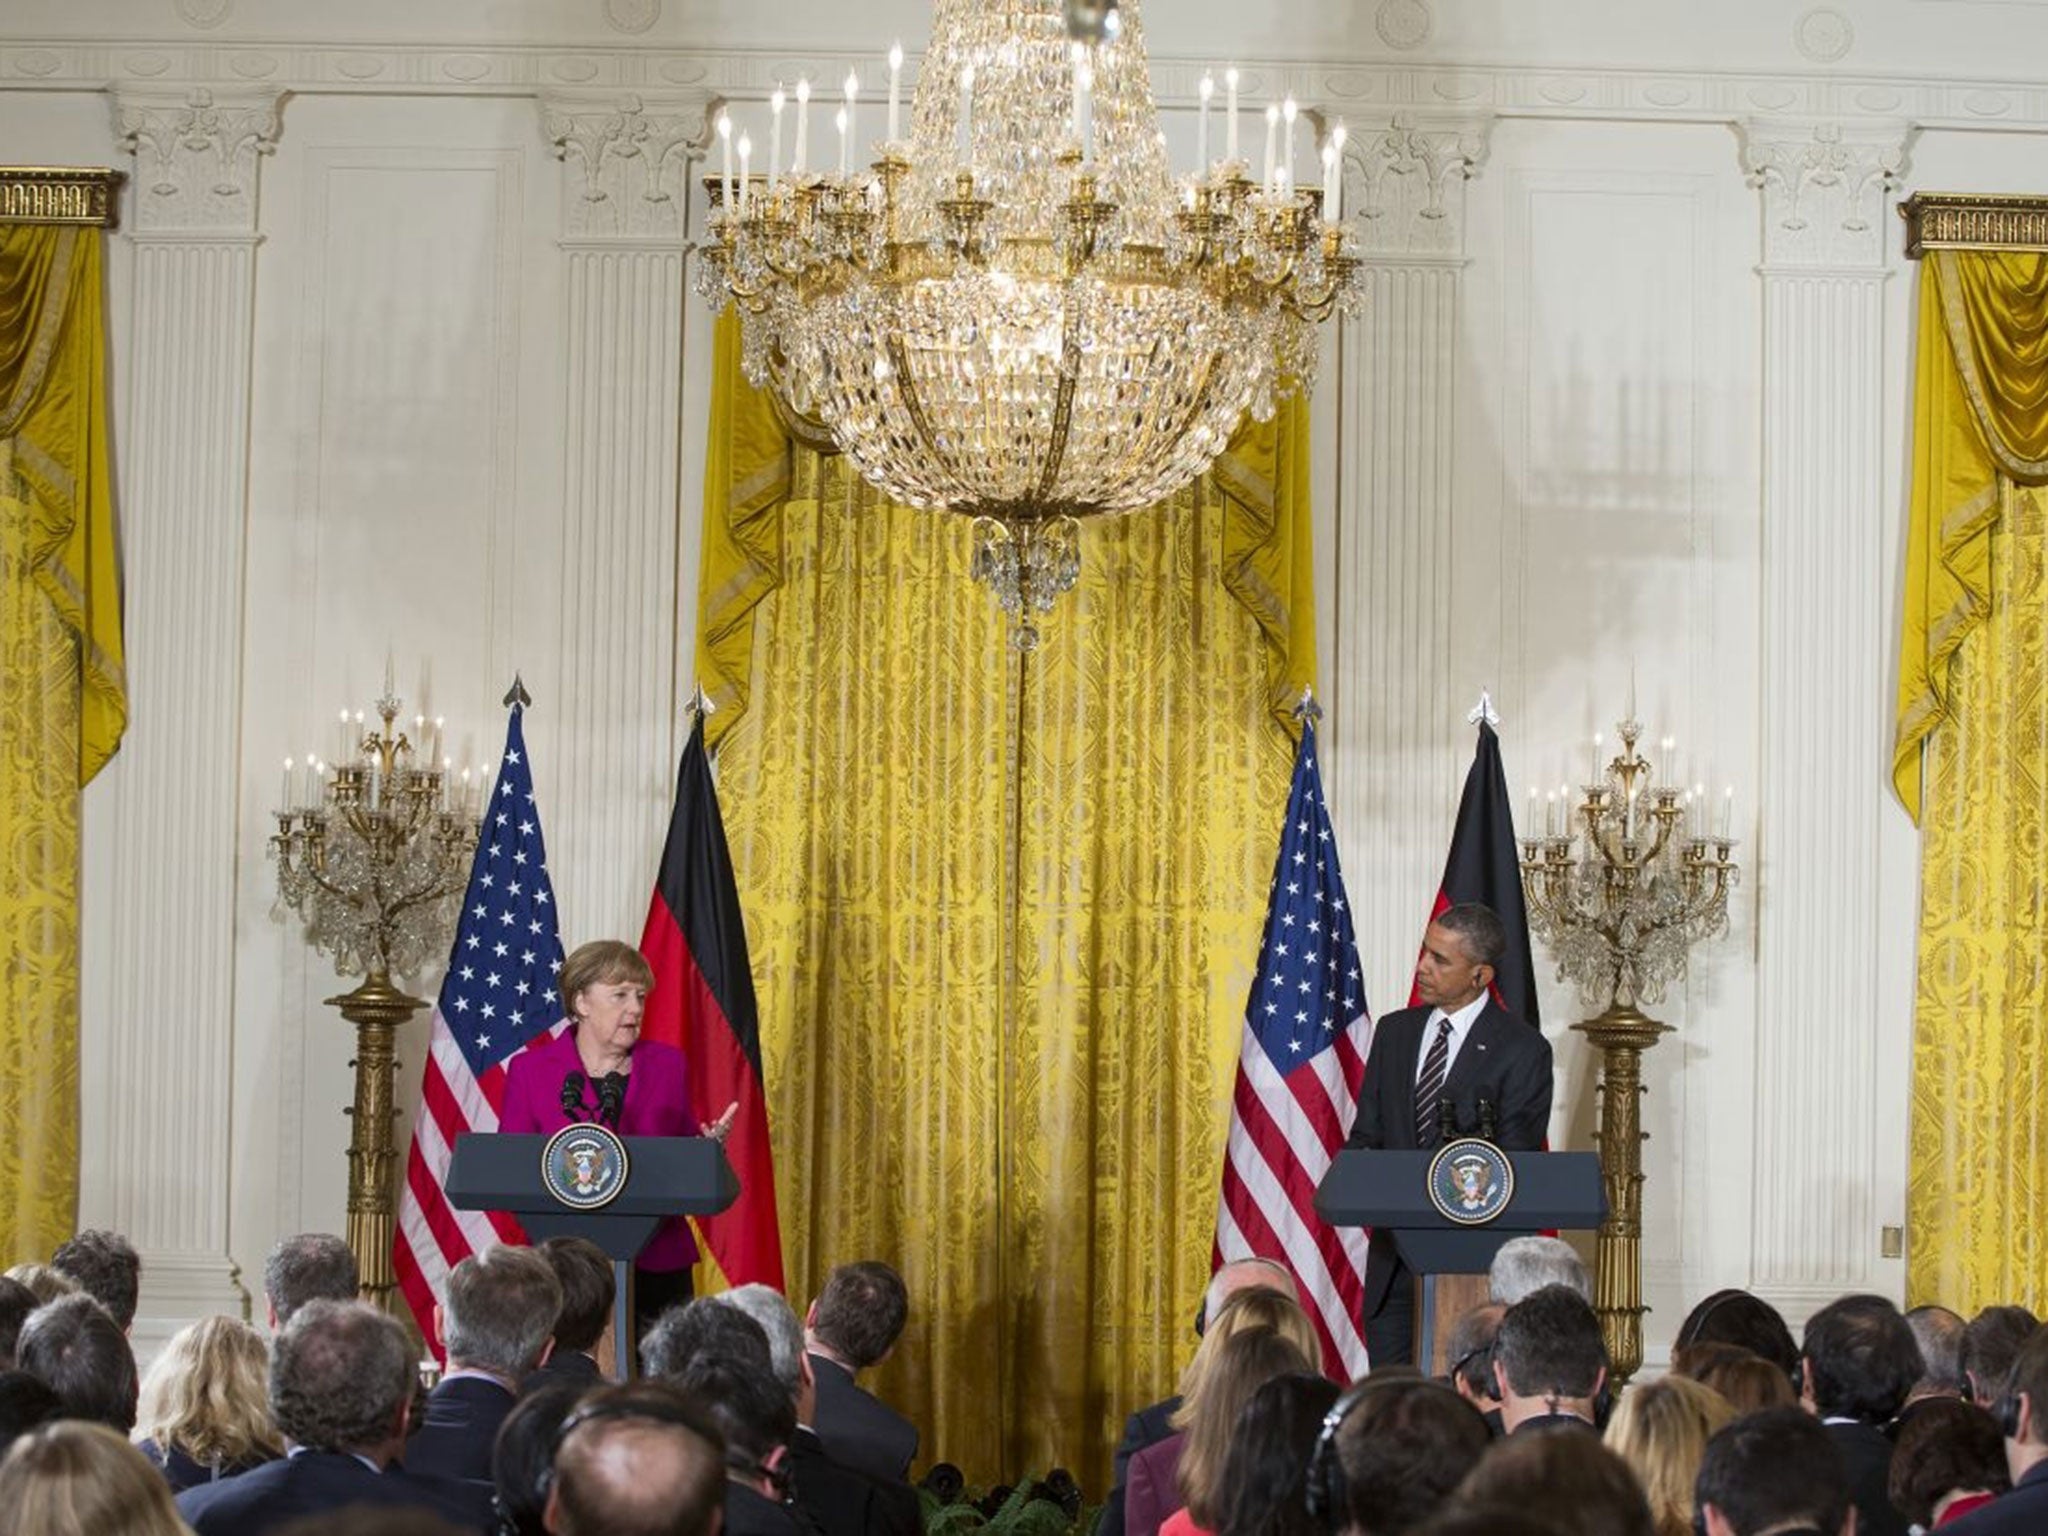 President Barack Obama listen as German Chancellor Angela Merkel speaks during their joint news conference in the East Room of the White House in Washington